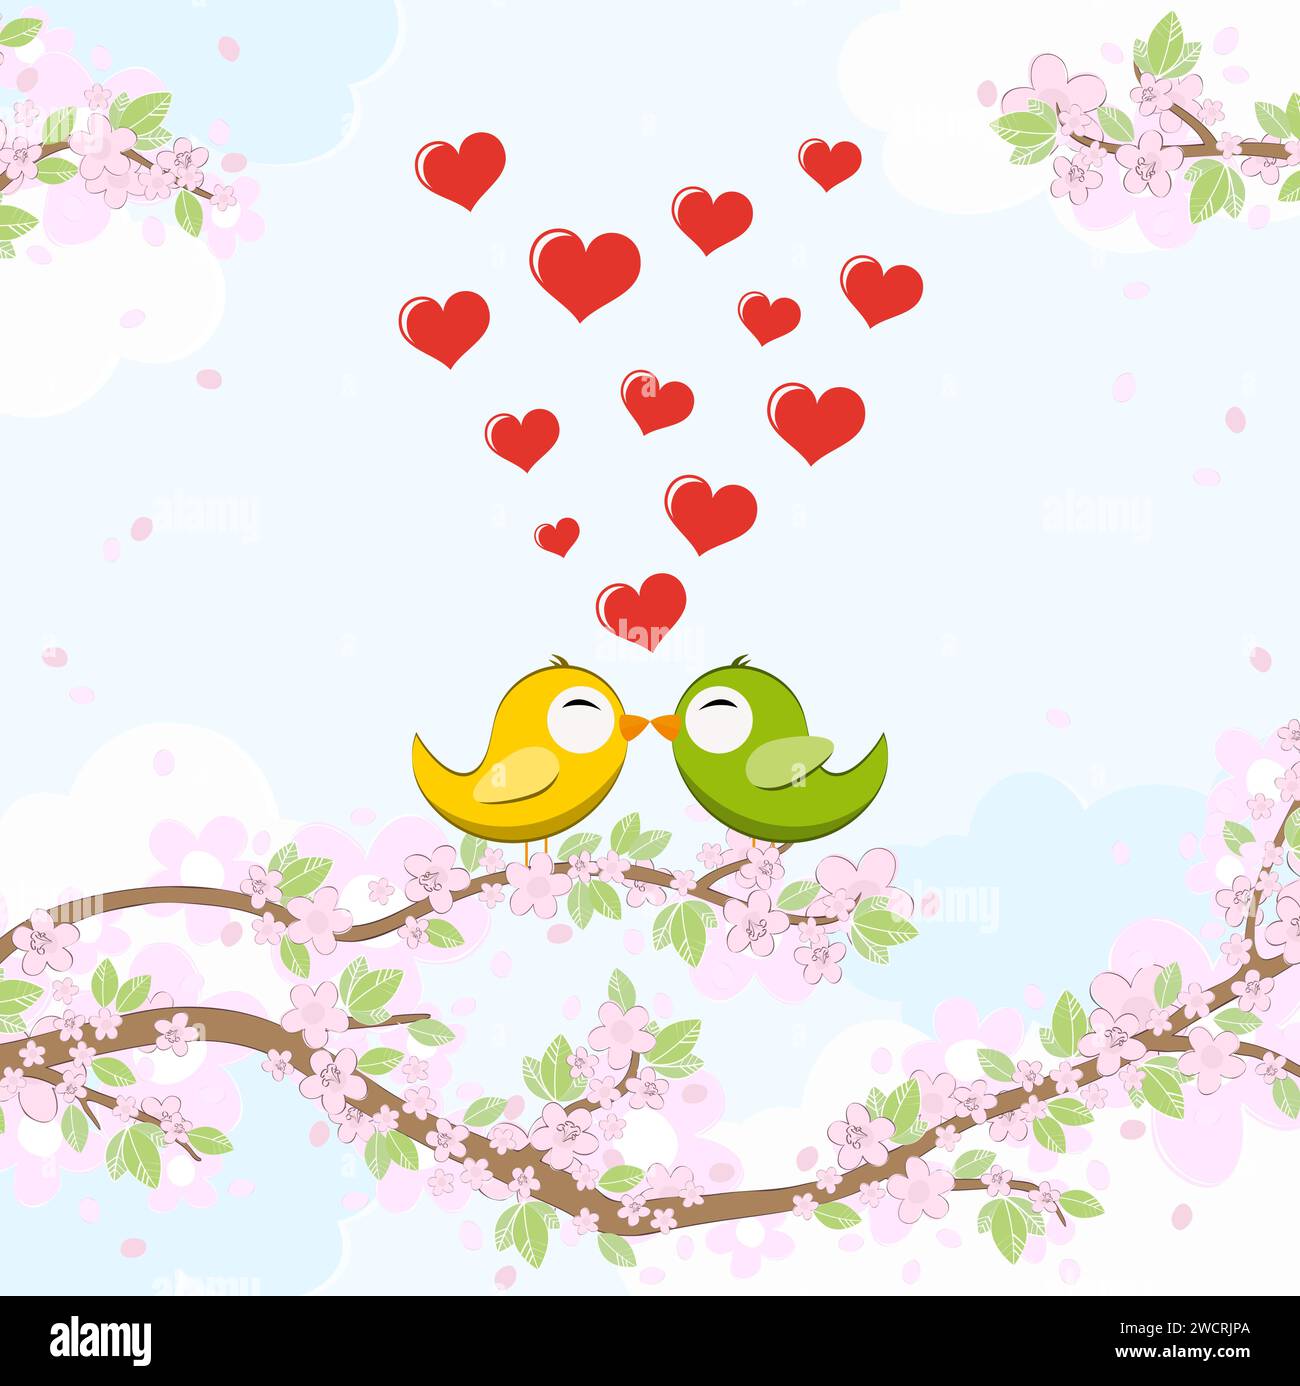 eps vector file with yellow and green colored kissing birds in love sitting on branches with blossoms and green leaves in spring time, background with Stock Vector